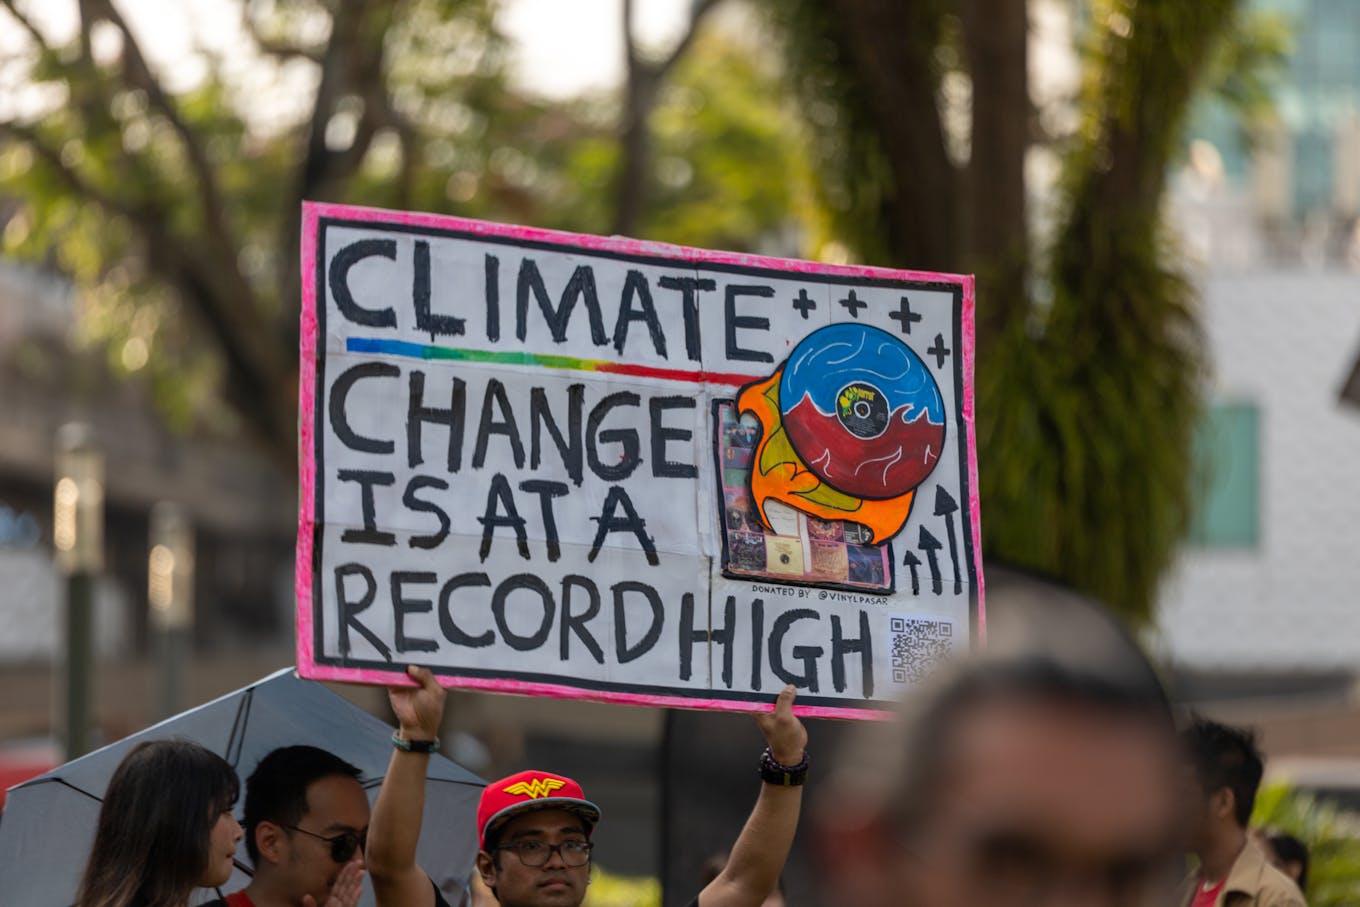 Climate change is at a record high placard - SG Climate Rally 2023